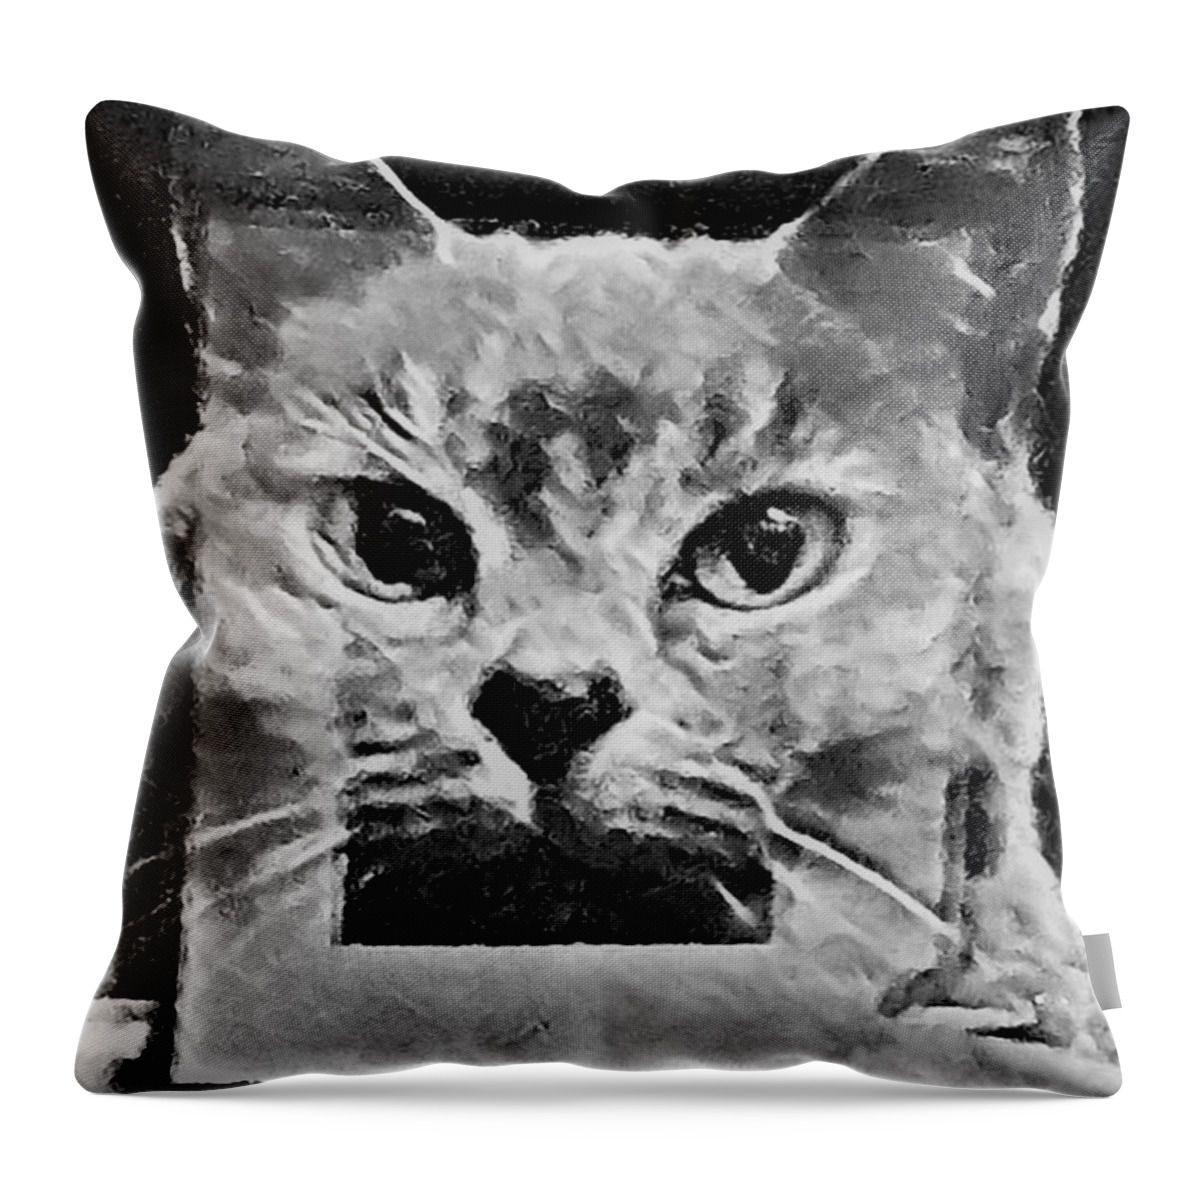 Digital Art Throw Pillow featuring the photograph Reflections by Tracey Lee Cassin